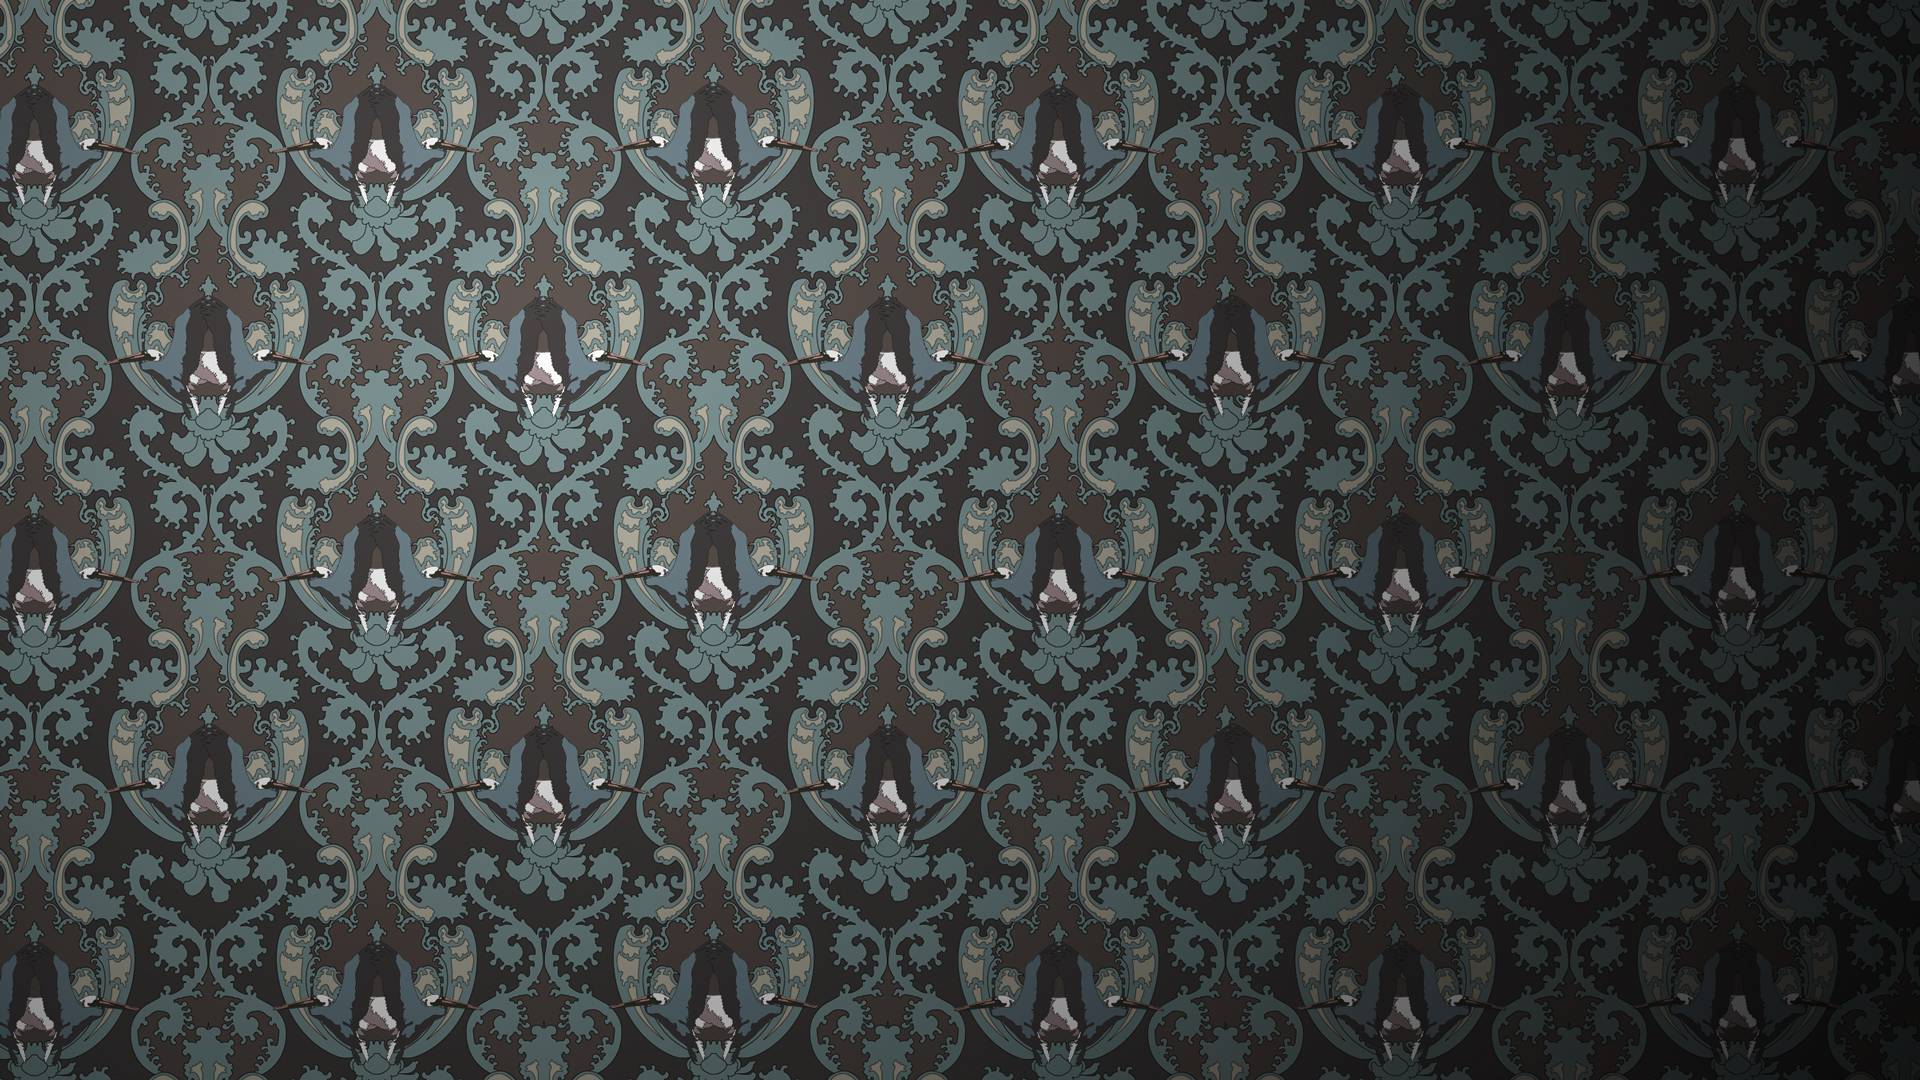 Gothic Victorian Fabric Wallpaper and Home Decor  Spoonflower